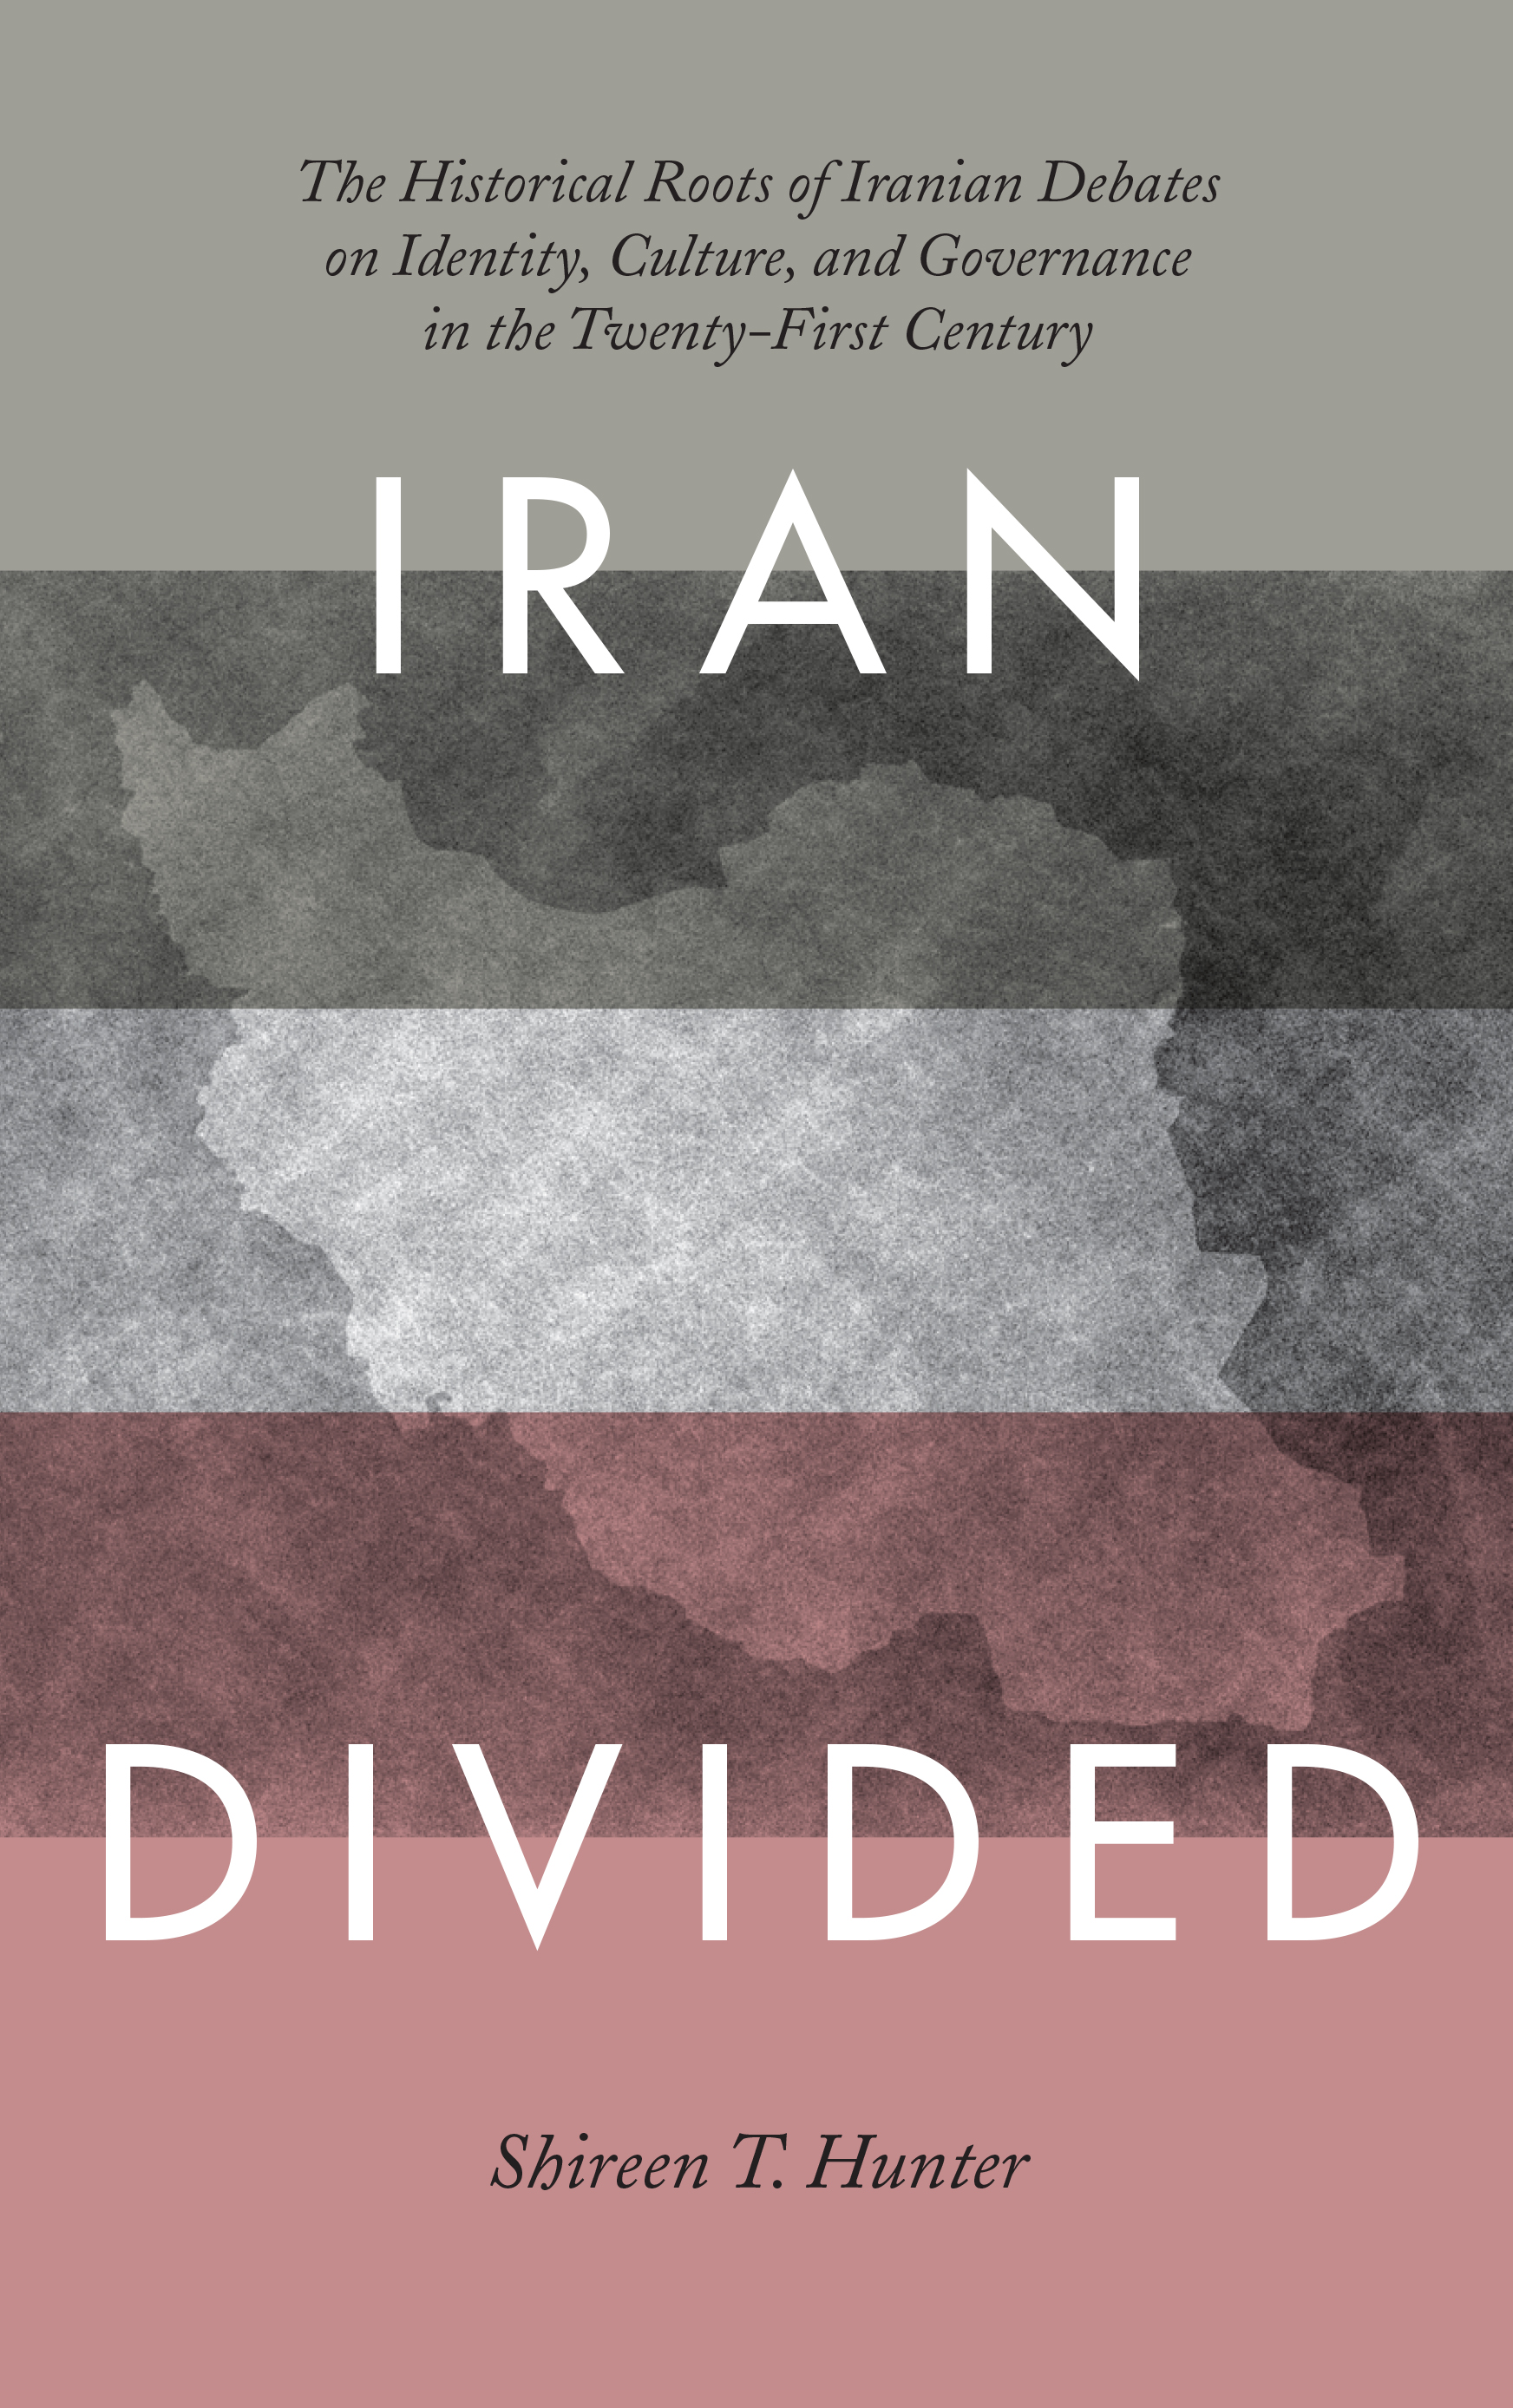 Iran Divided: The Historical Roots of Iranian Debates on Identity, Culture, and Governance in the Twenty-First Century